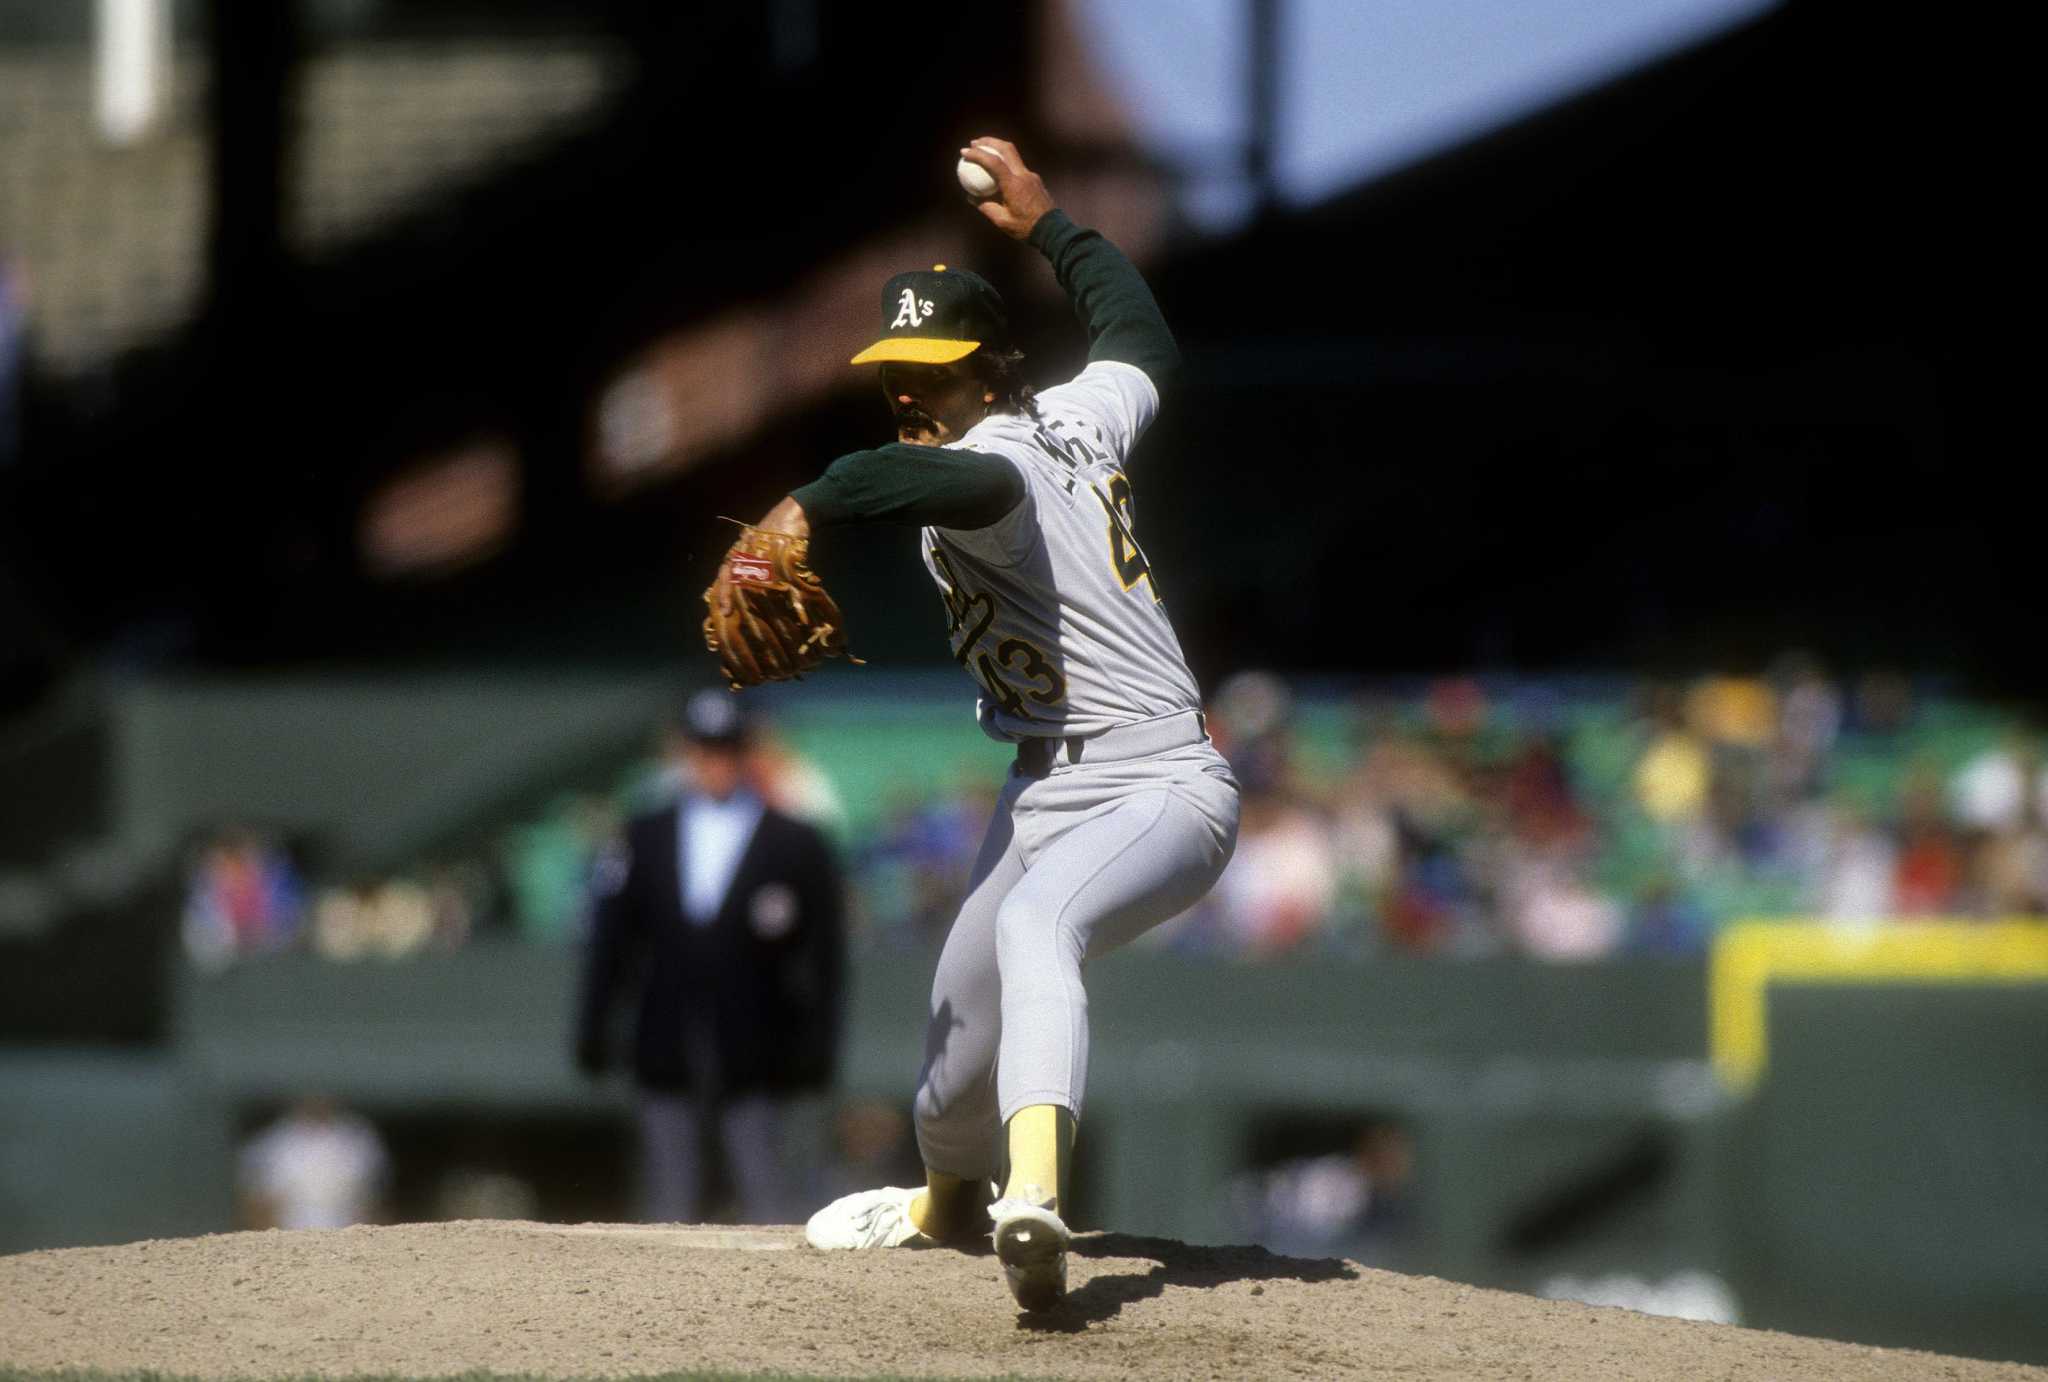 Dennis Eckersley on starting, closing, adrenaline and A's lore